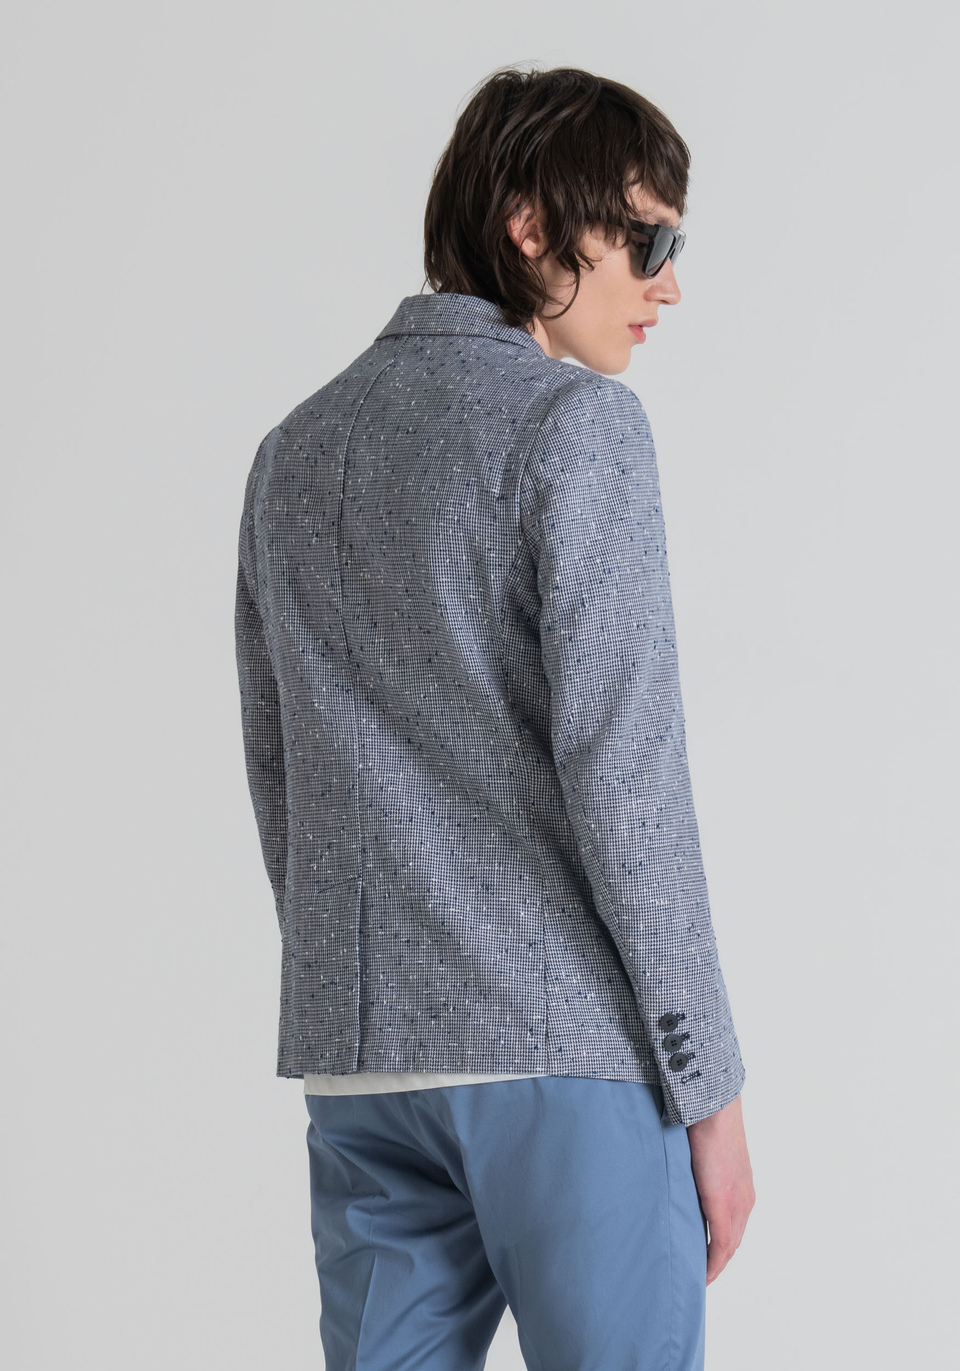 SLIM-FIT “KIRSTEN” JACKET A LINEN BLEND WITH NEPS | Antony Morato